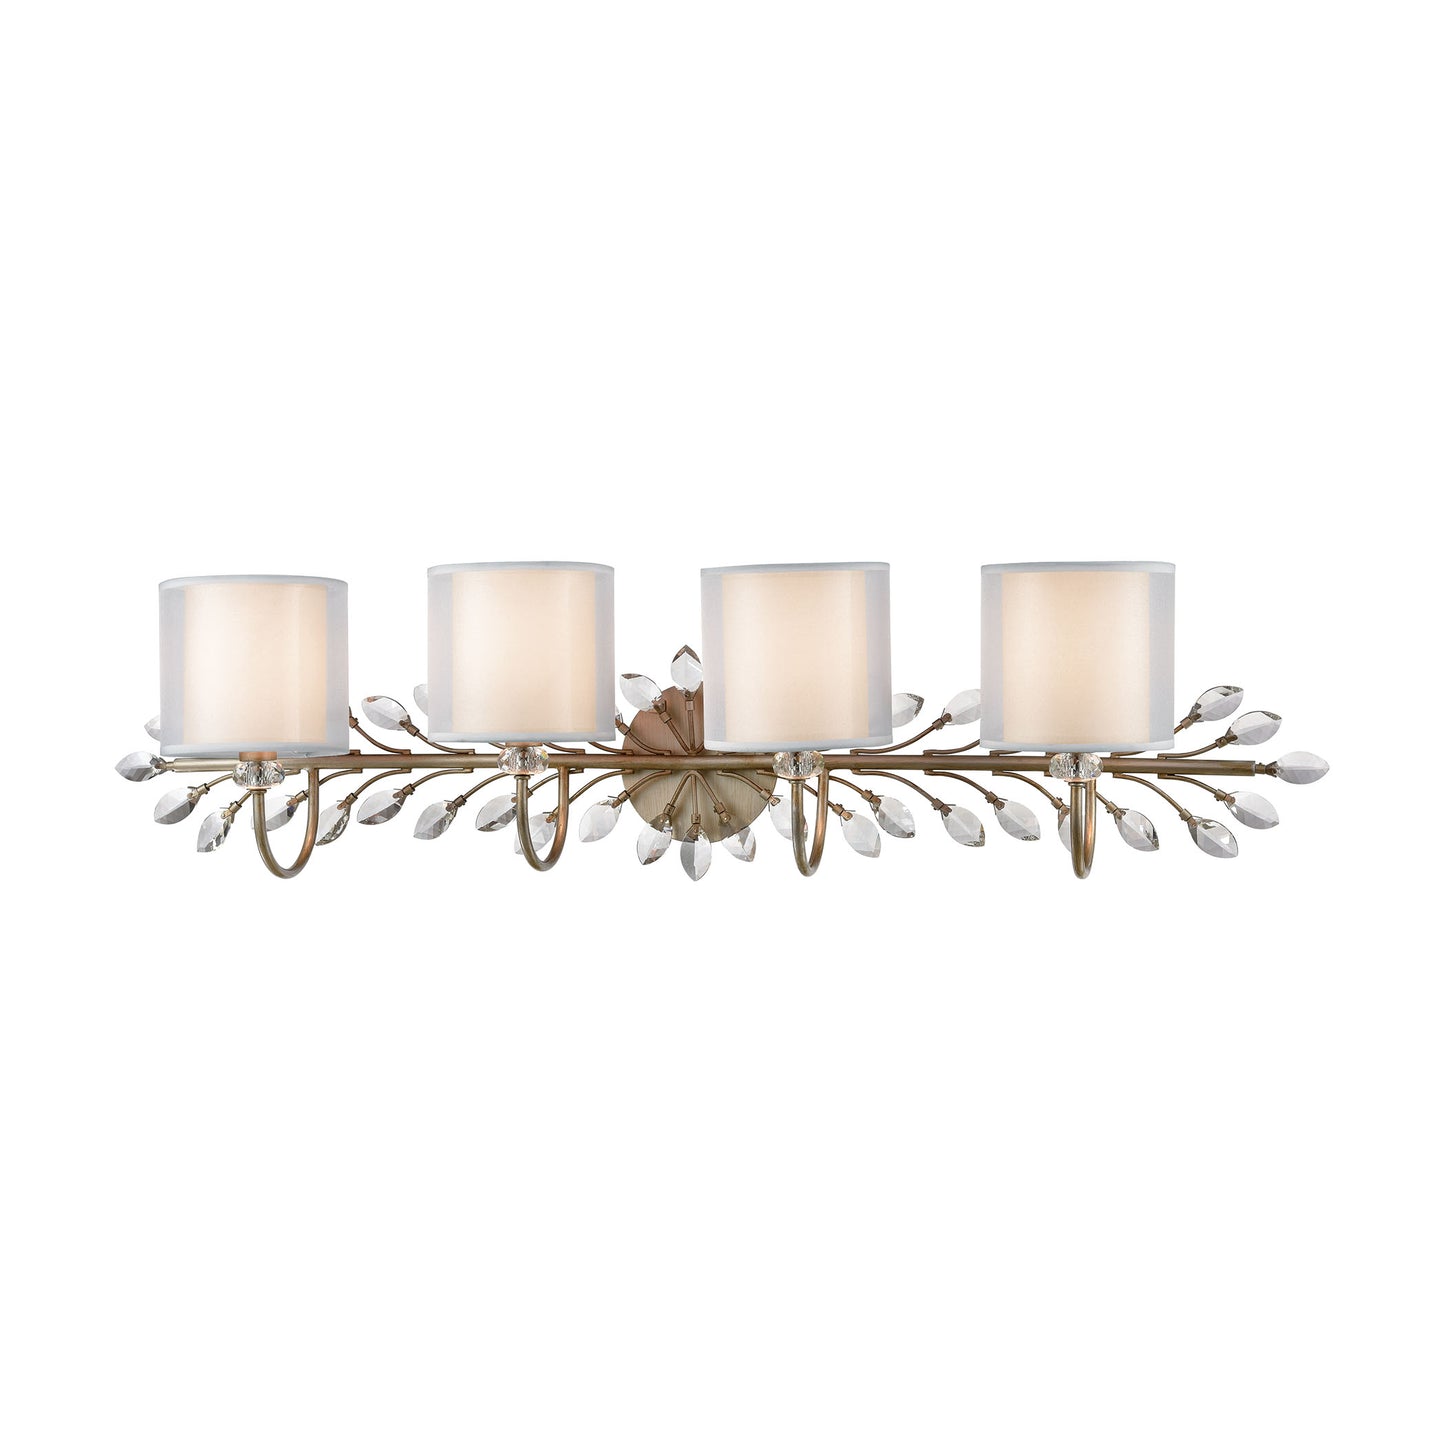 ELK Lighting 16279/4 - Asbury 42" Wide 4-Light Vanity Light in Aged Silver with White Fabric Shade I